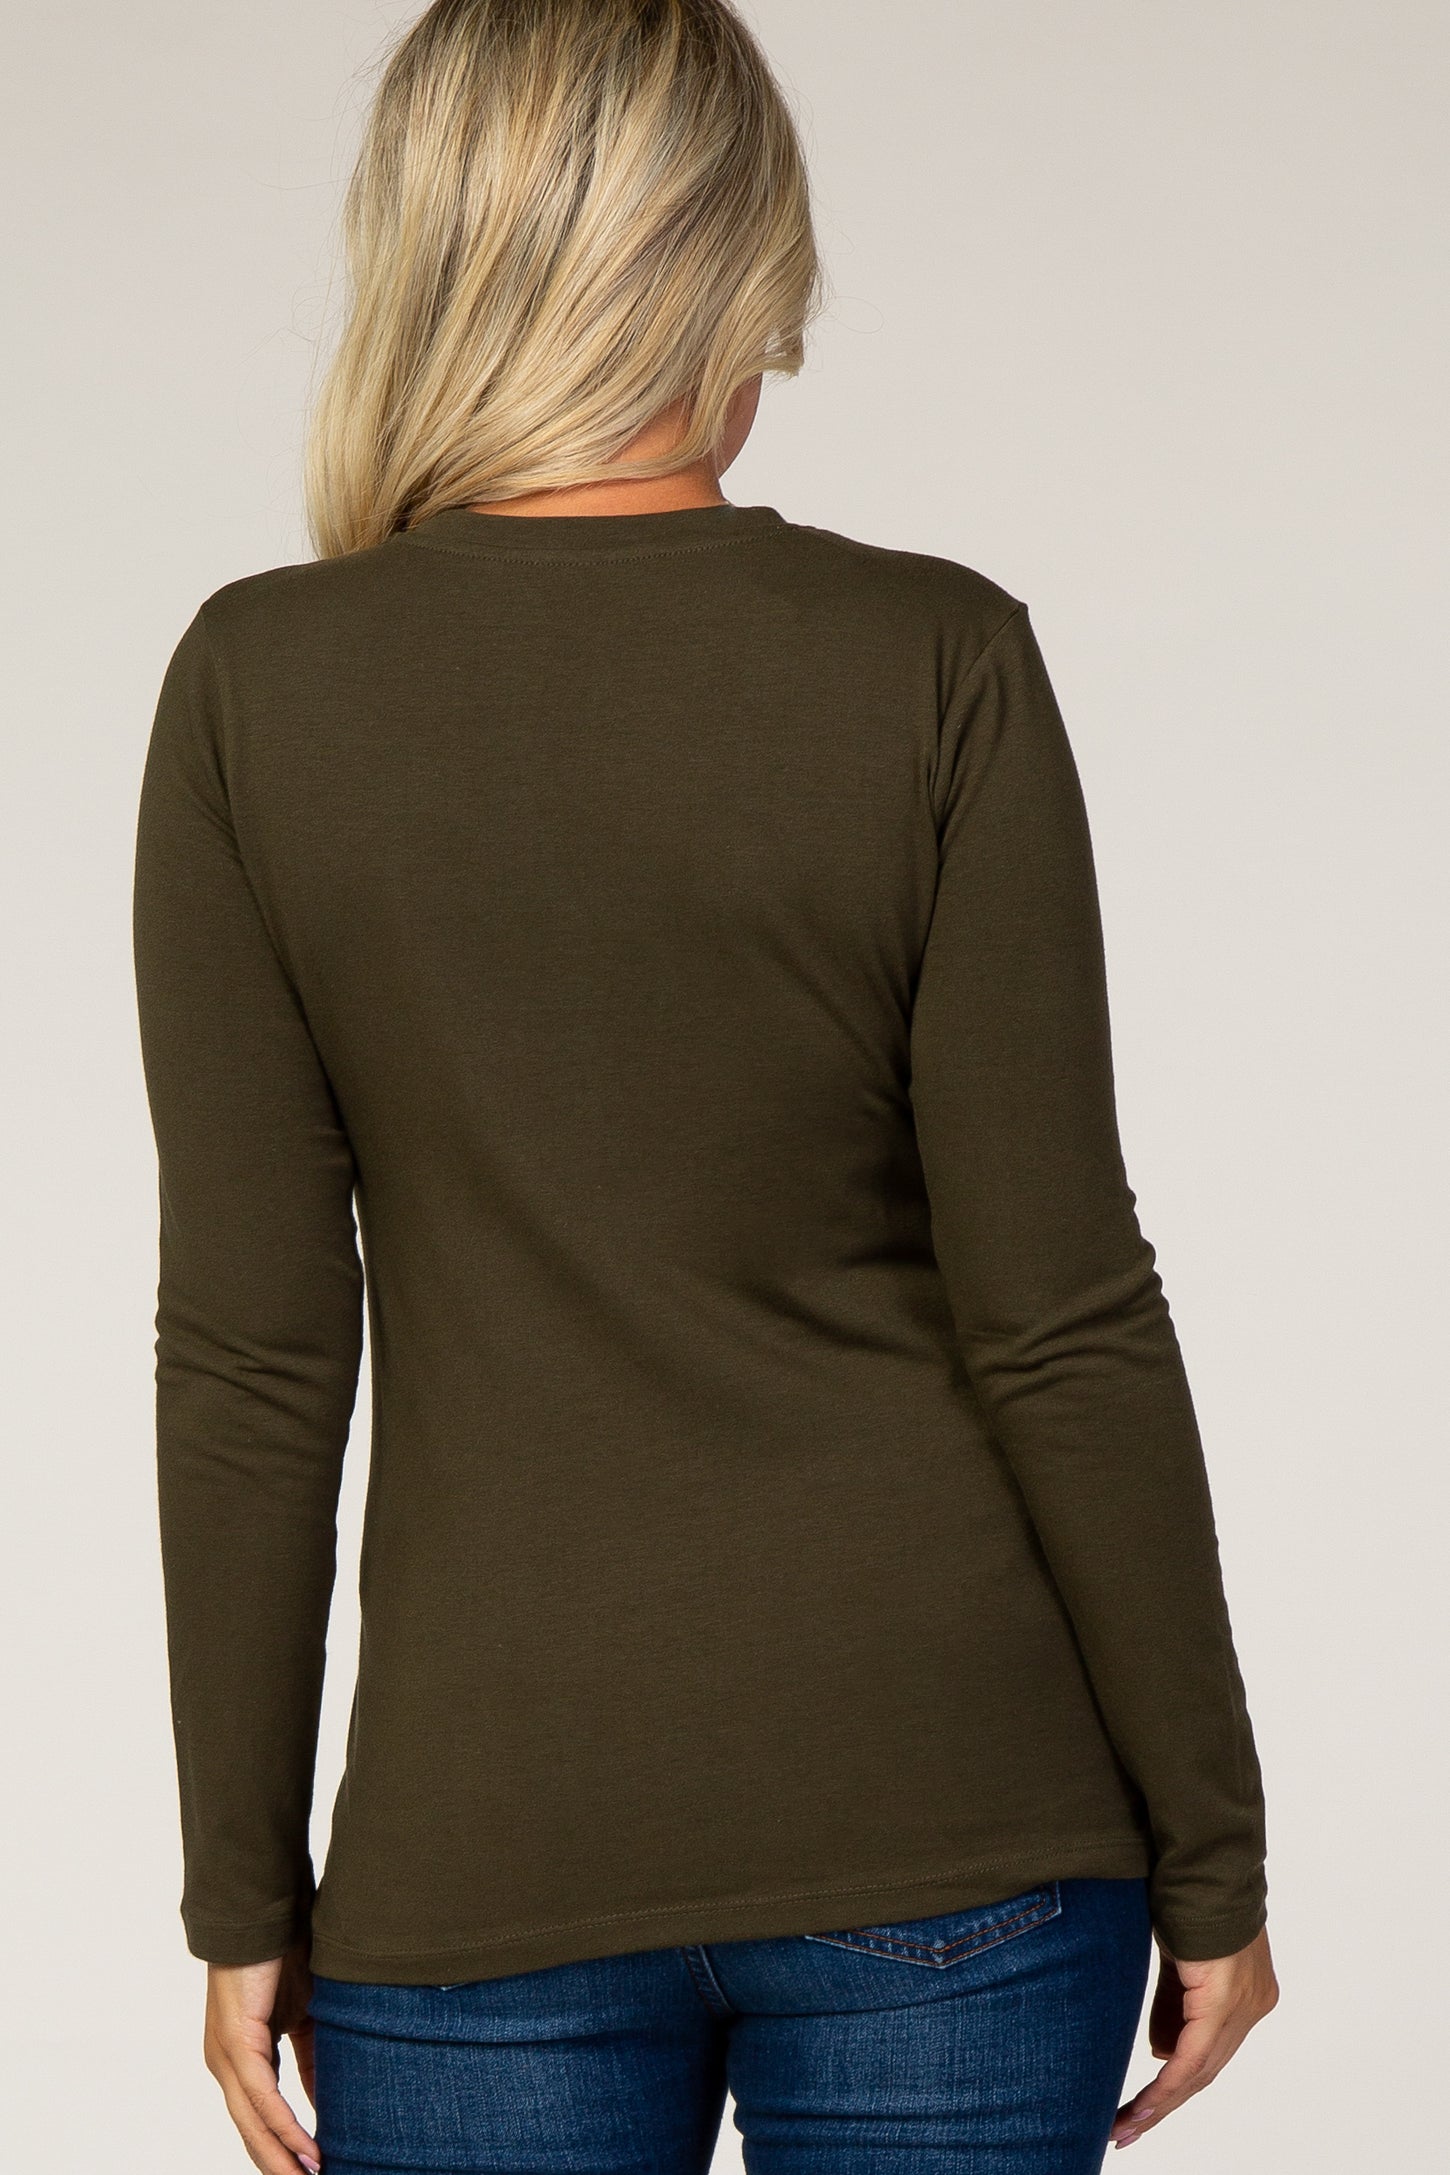 Olive Fitted Long Sleeve Maternity Tee